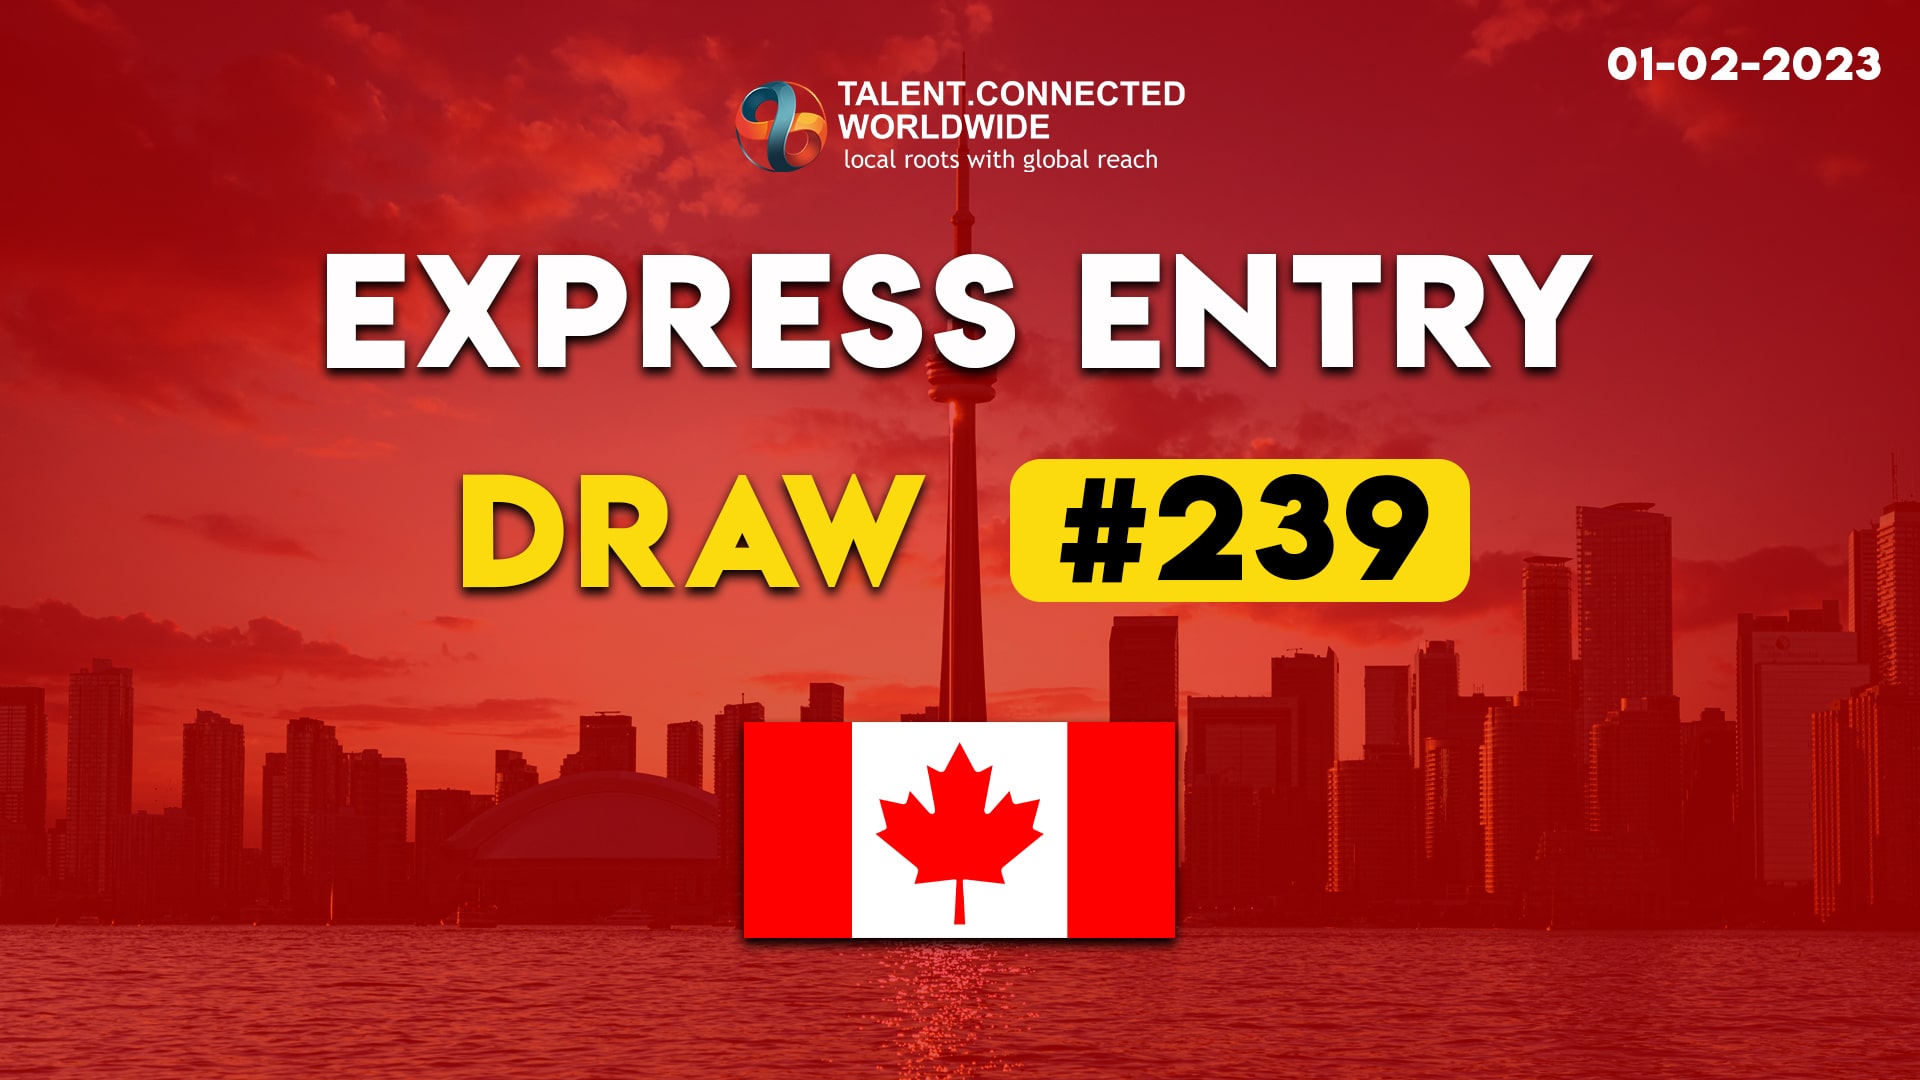 239th Express Entry draw: first PNP targeted draw of 2023